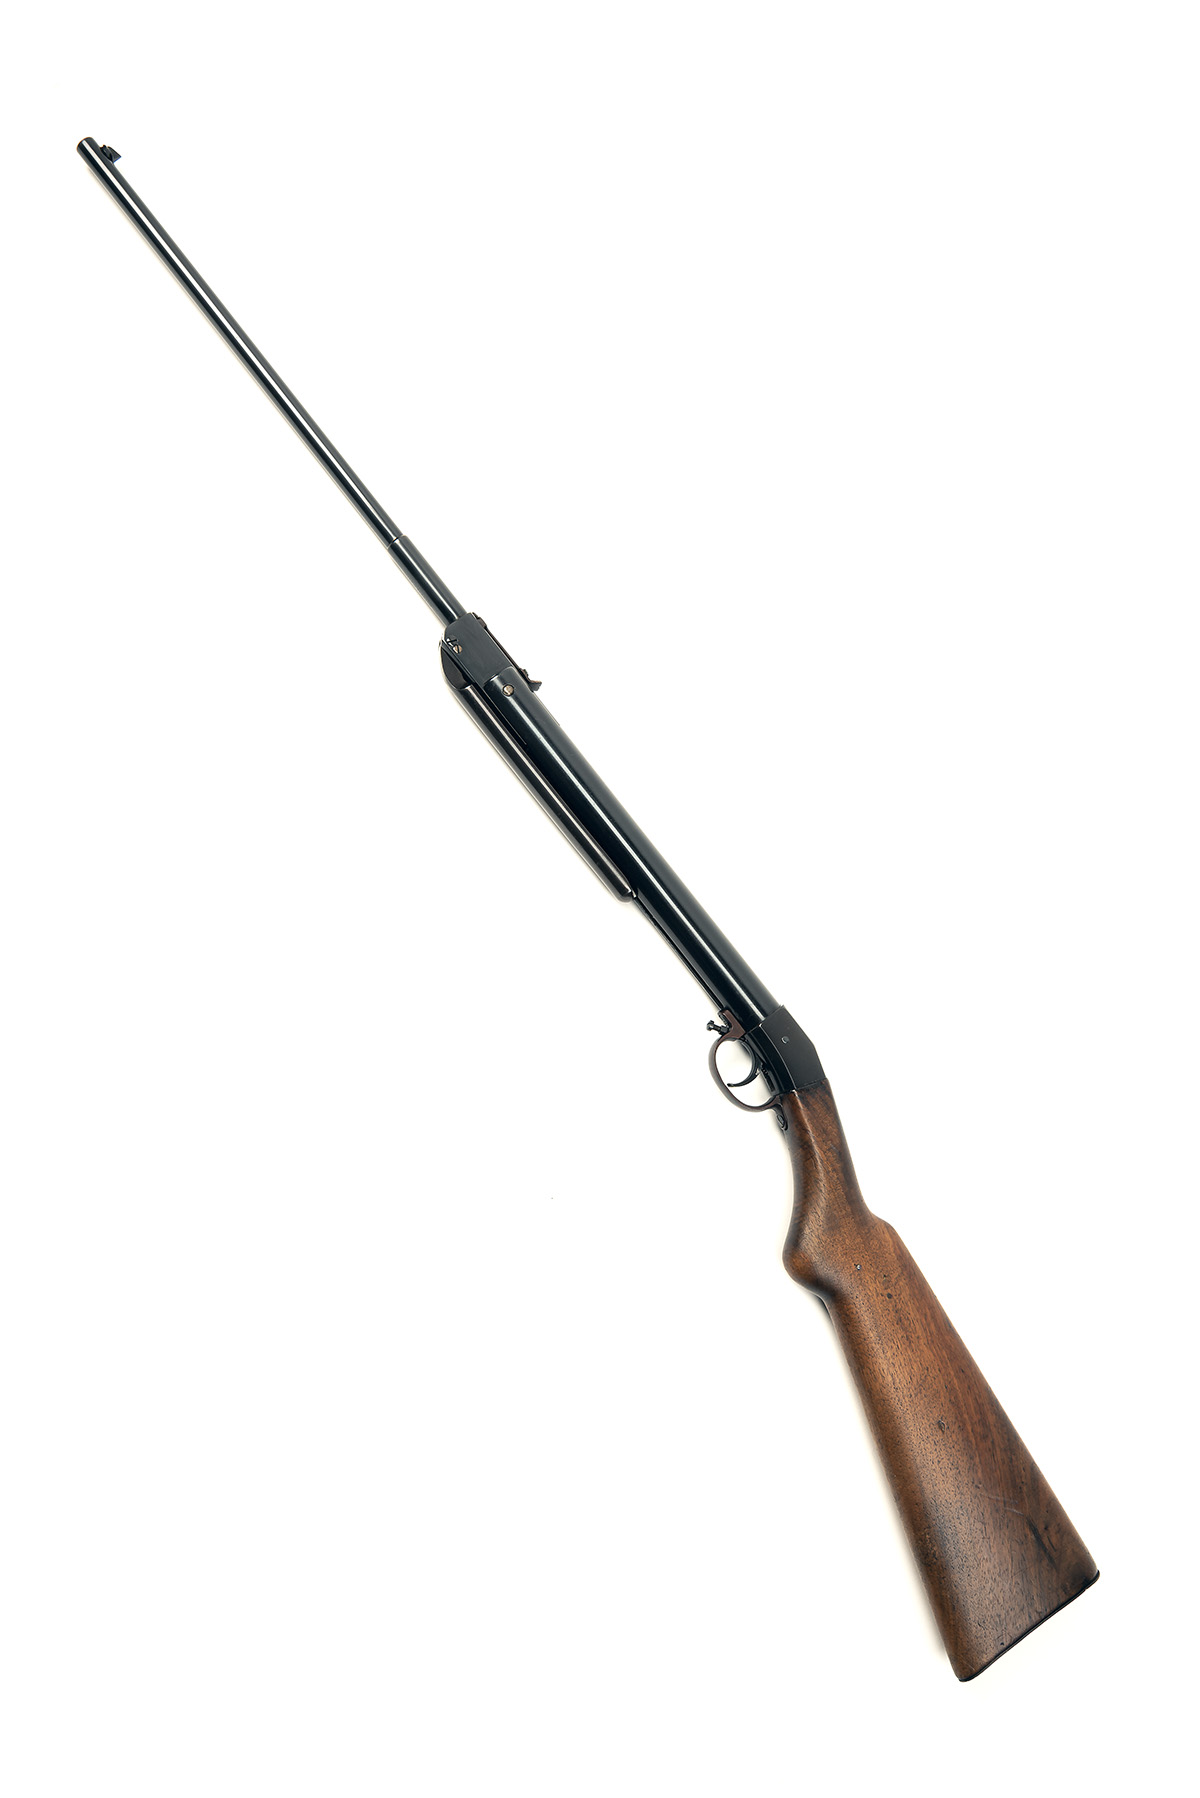 A SCARCE .177 PRE-WAR HAENAL BREAK-BARREL MODEL VIII AIR-RIFLE, serial no. 11236, almost certainly a - Image 9 of 9